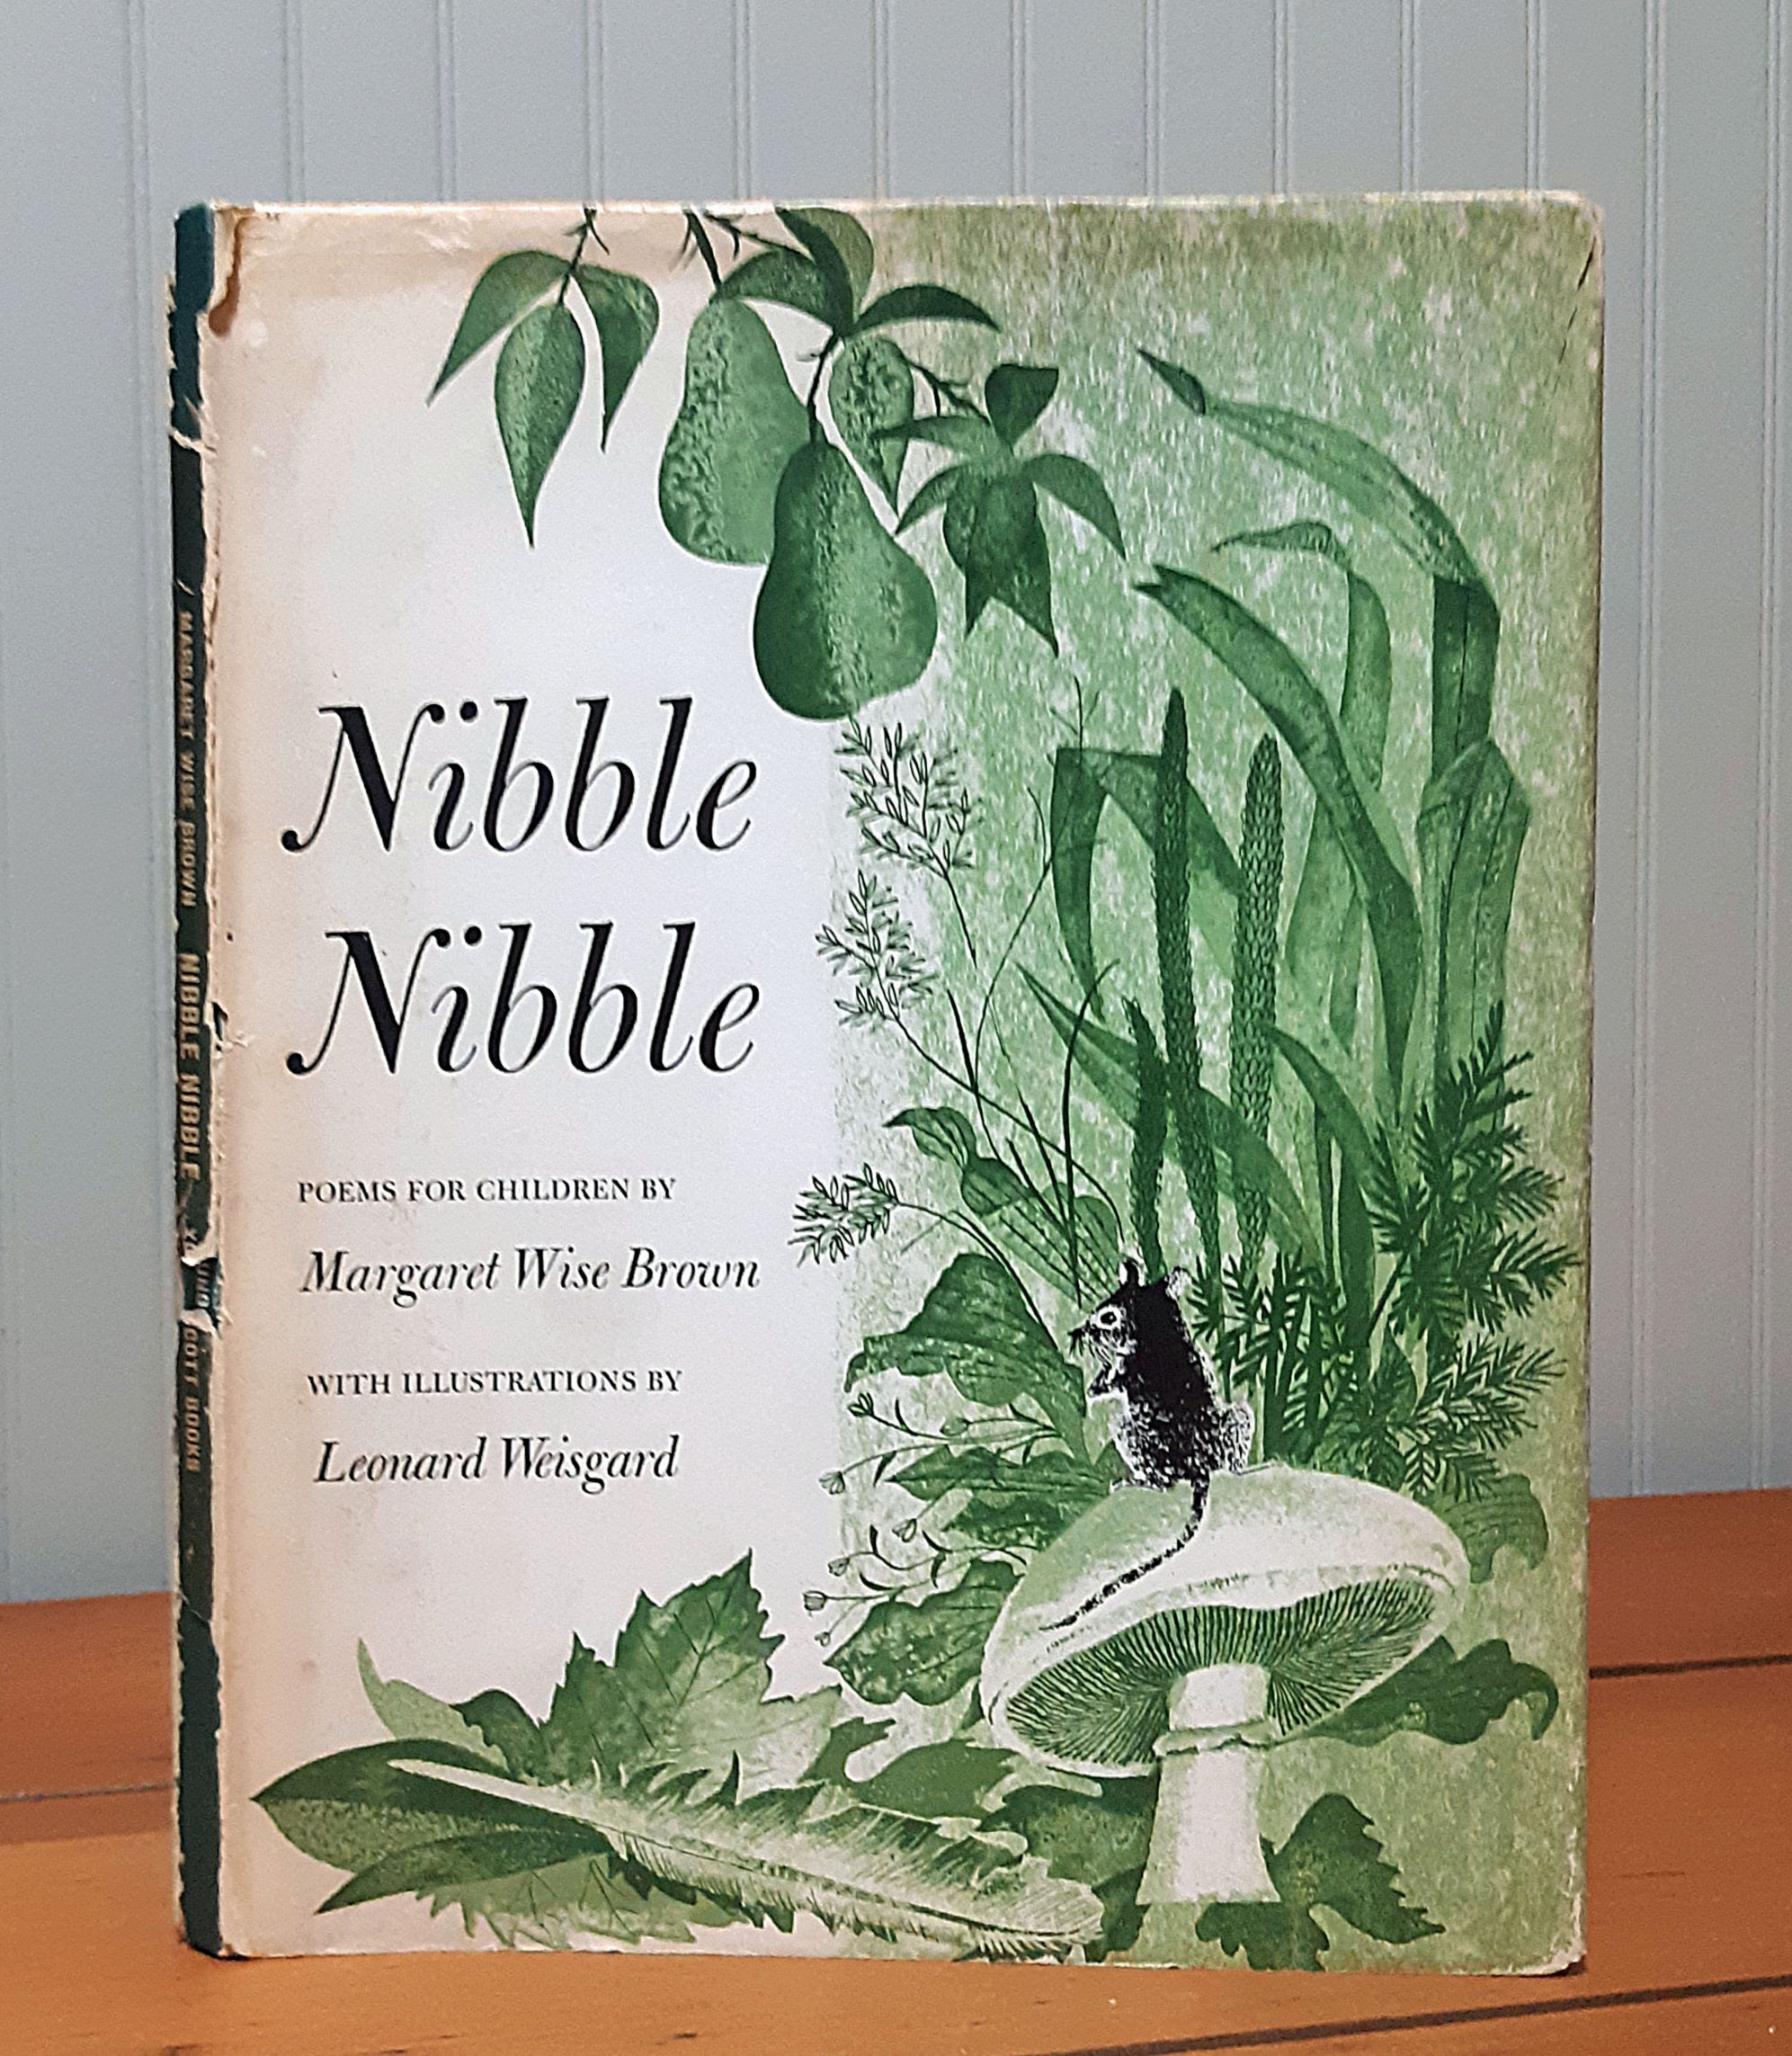 Image for Nibble Nibble: Poems for Children